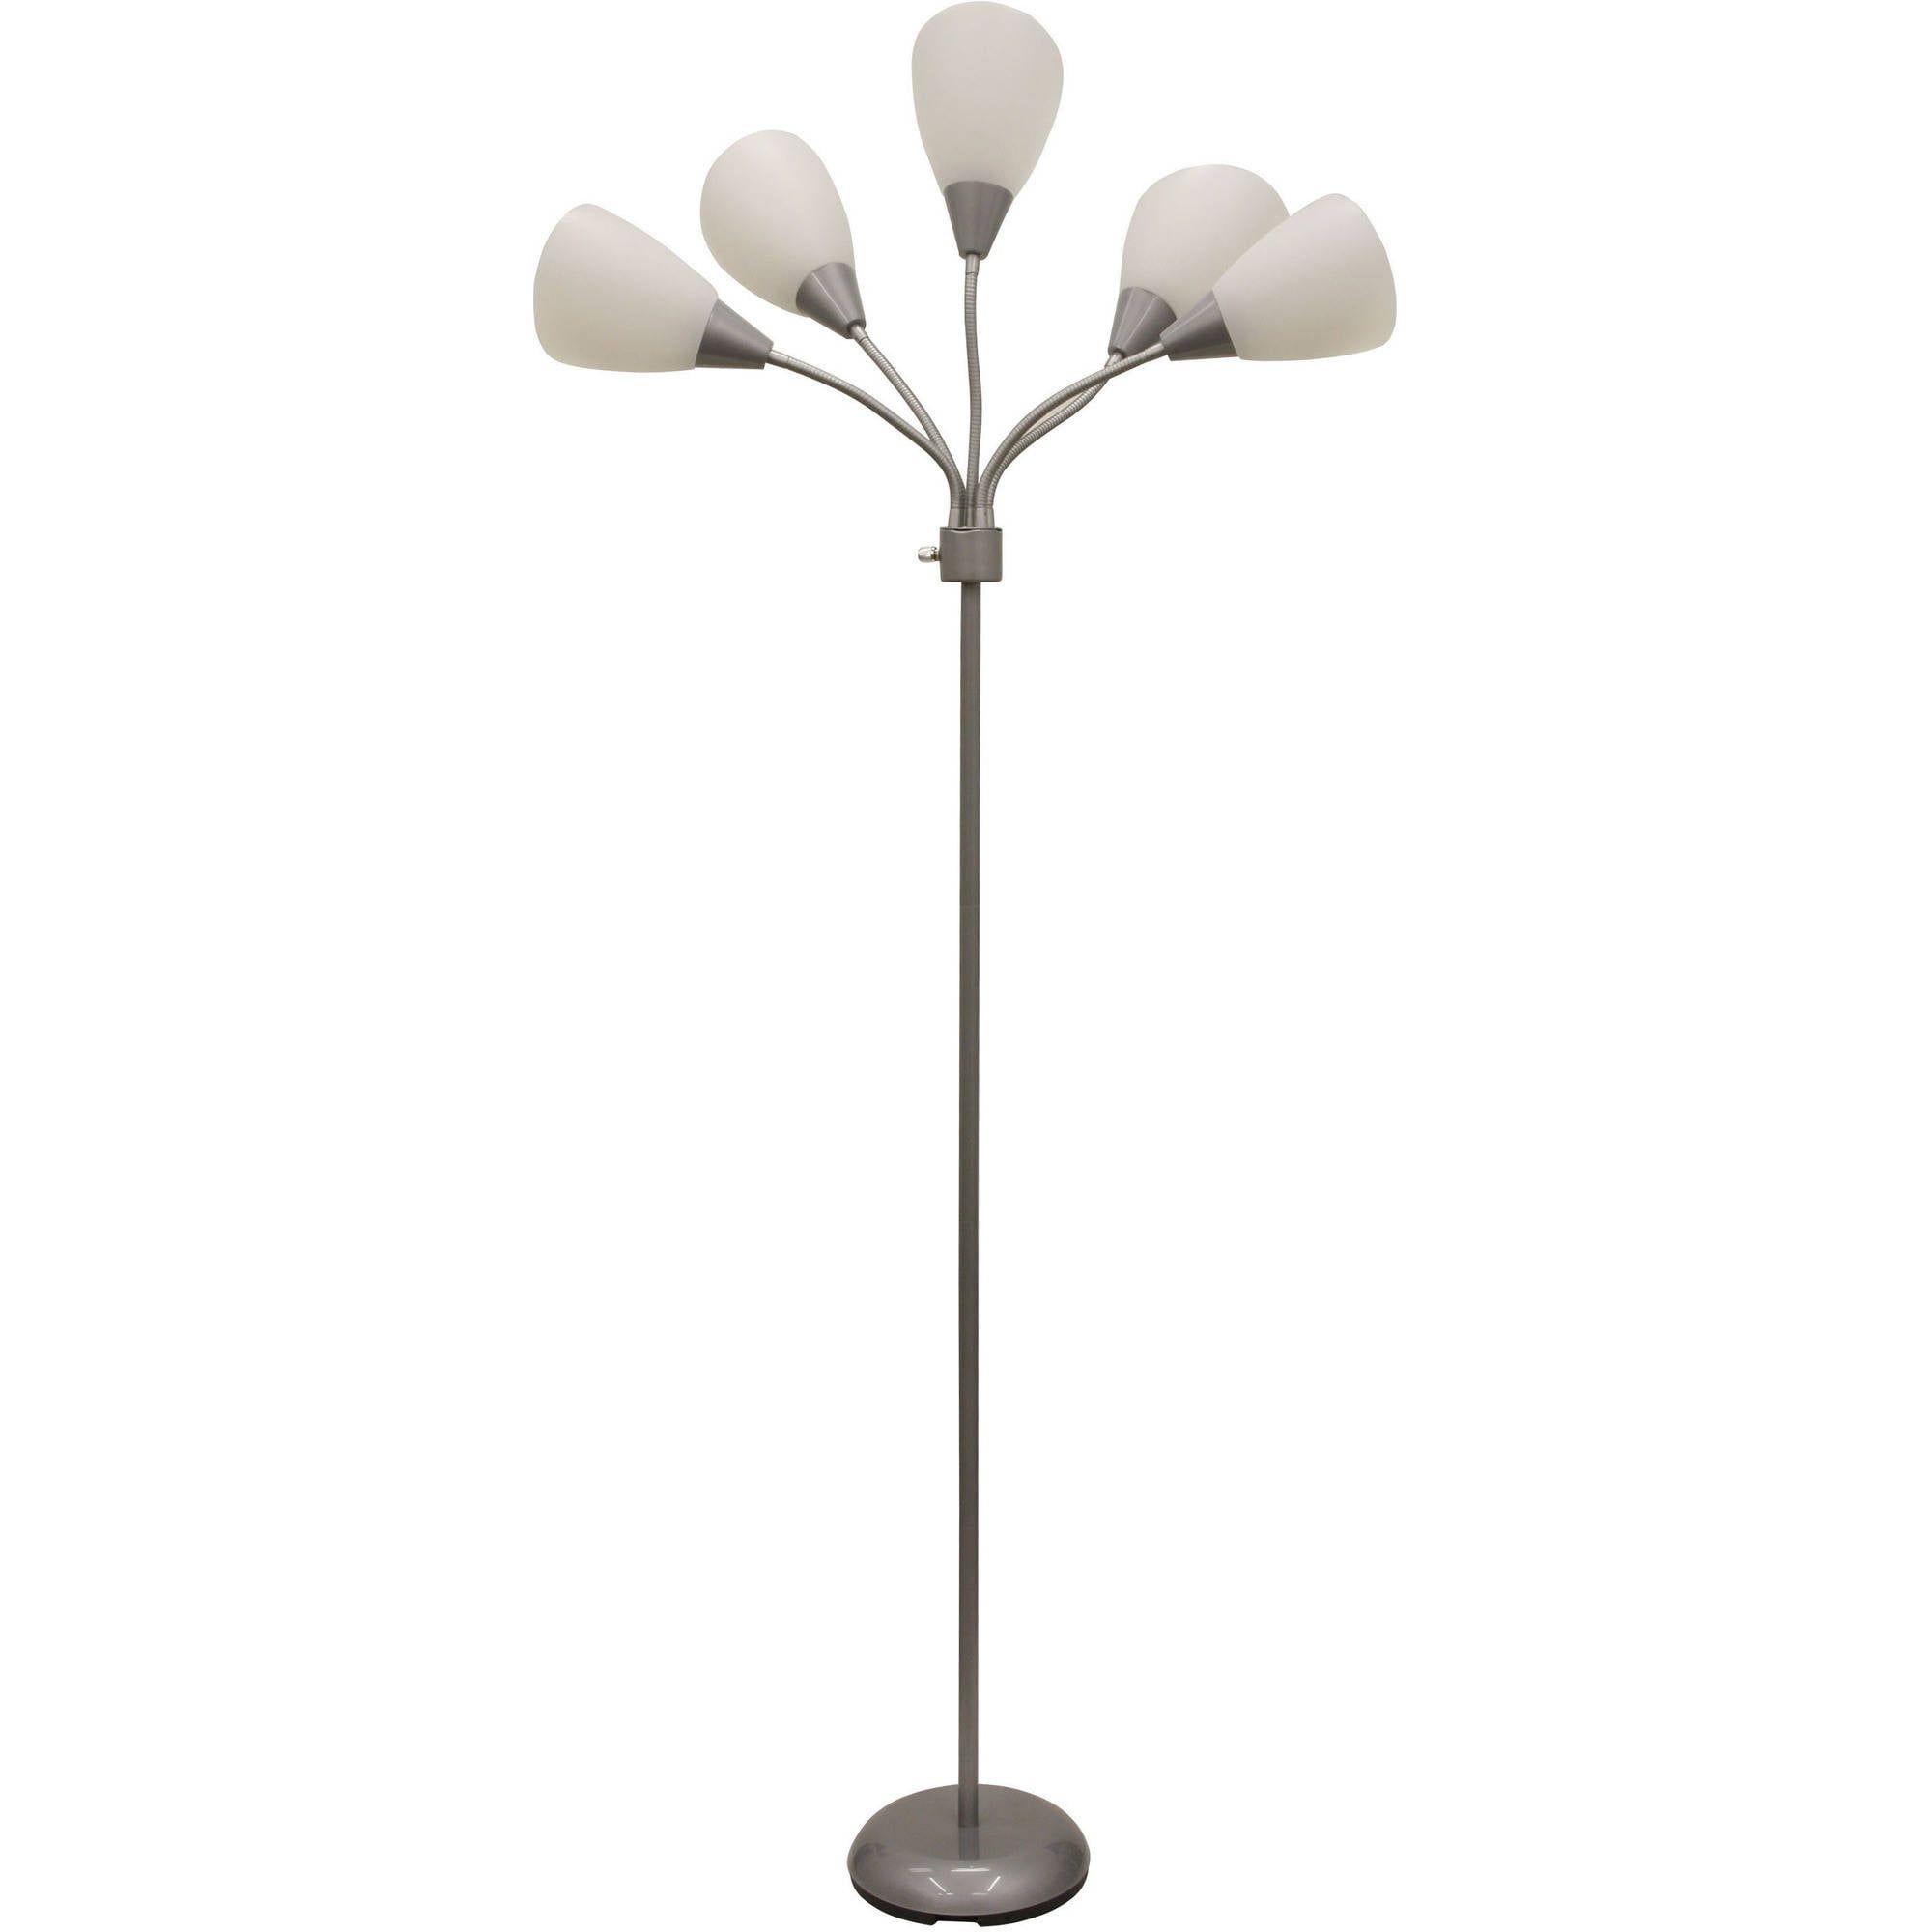 Mainstays 5 Light Multihead Floor Lamp, Silver With White Shade And A Metal  Base – Walmart With Regard To 5 Light Floor Lamps (View 1 of 20)